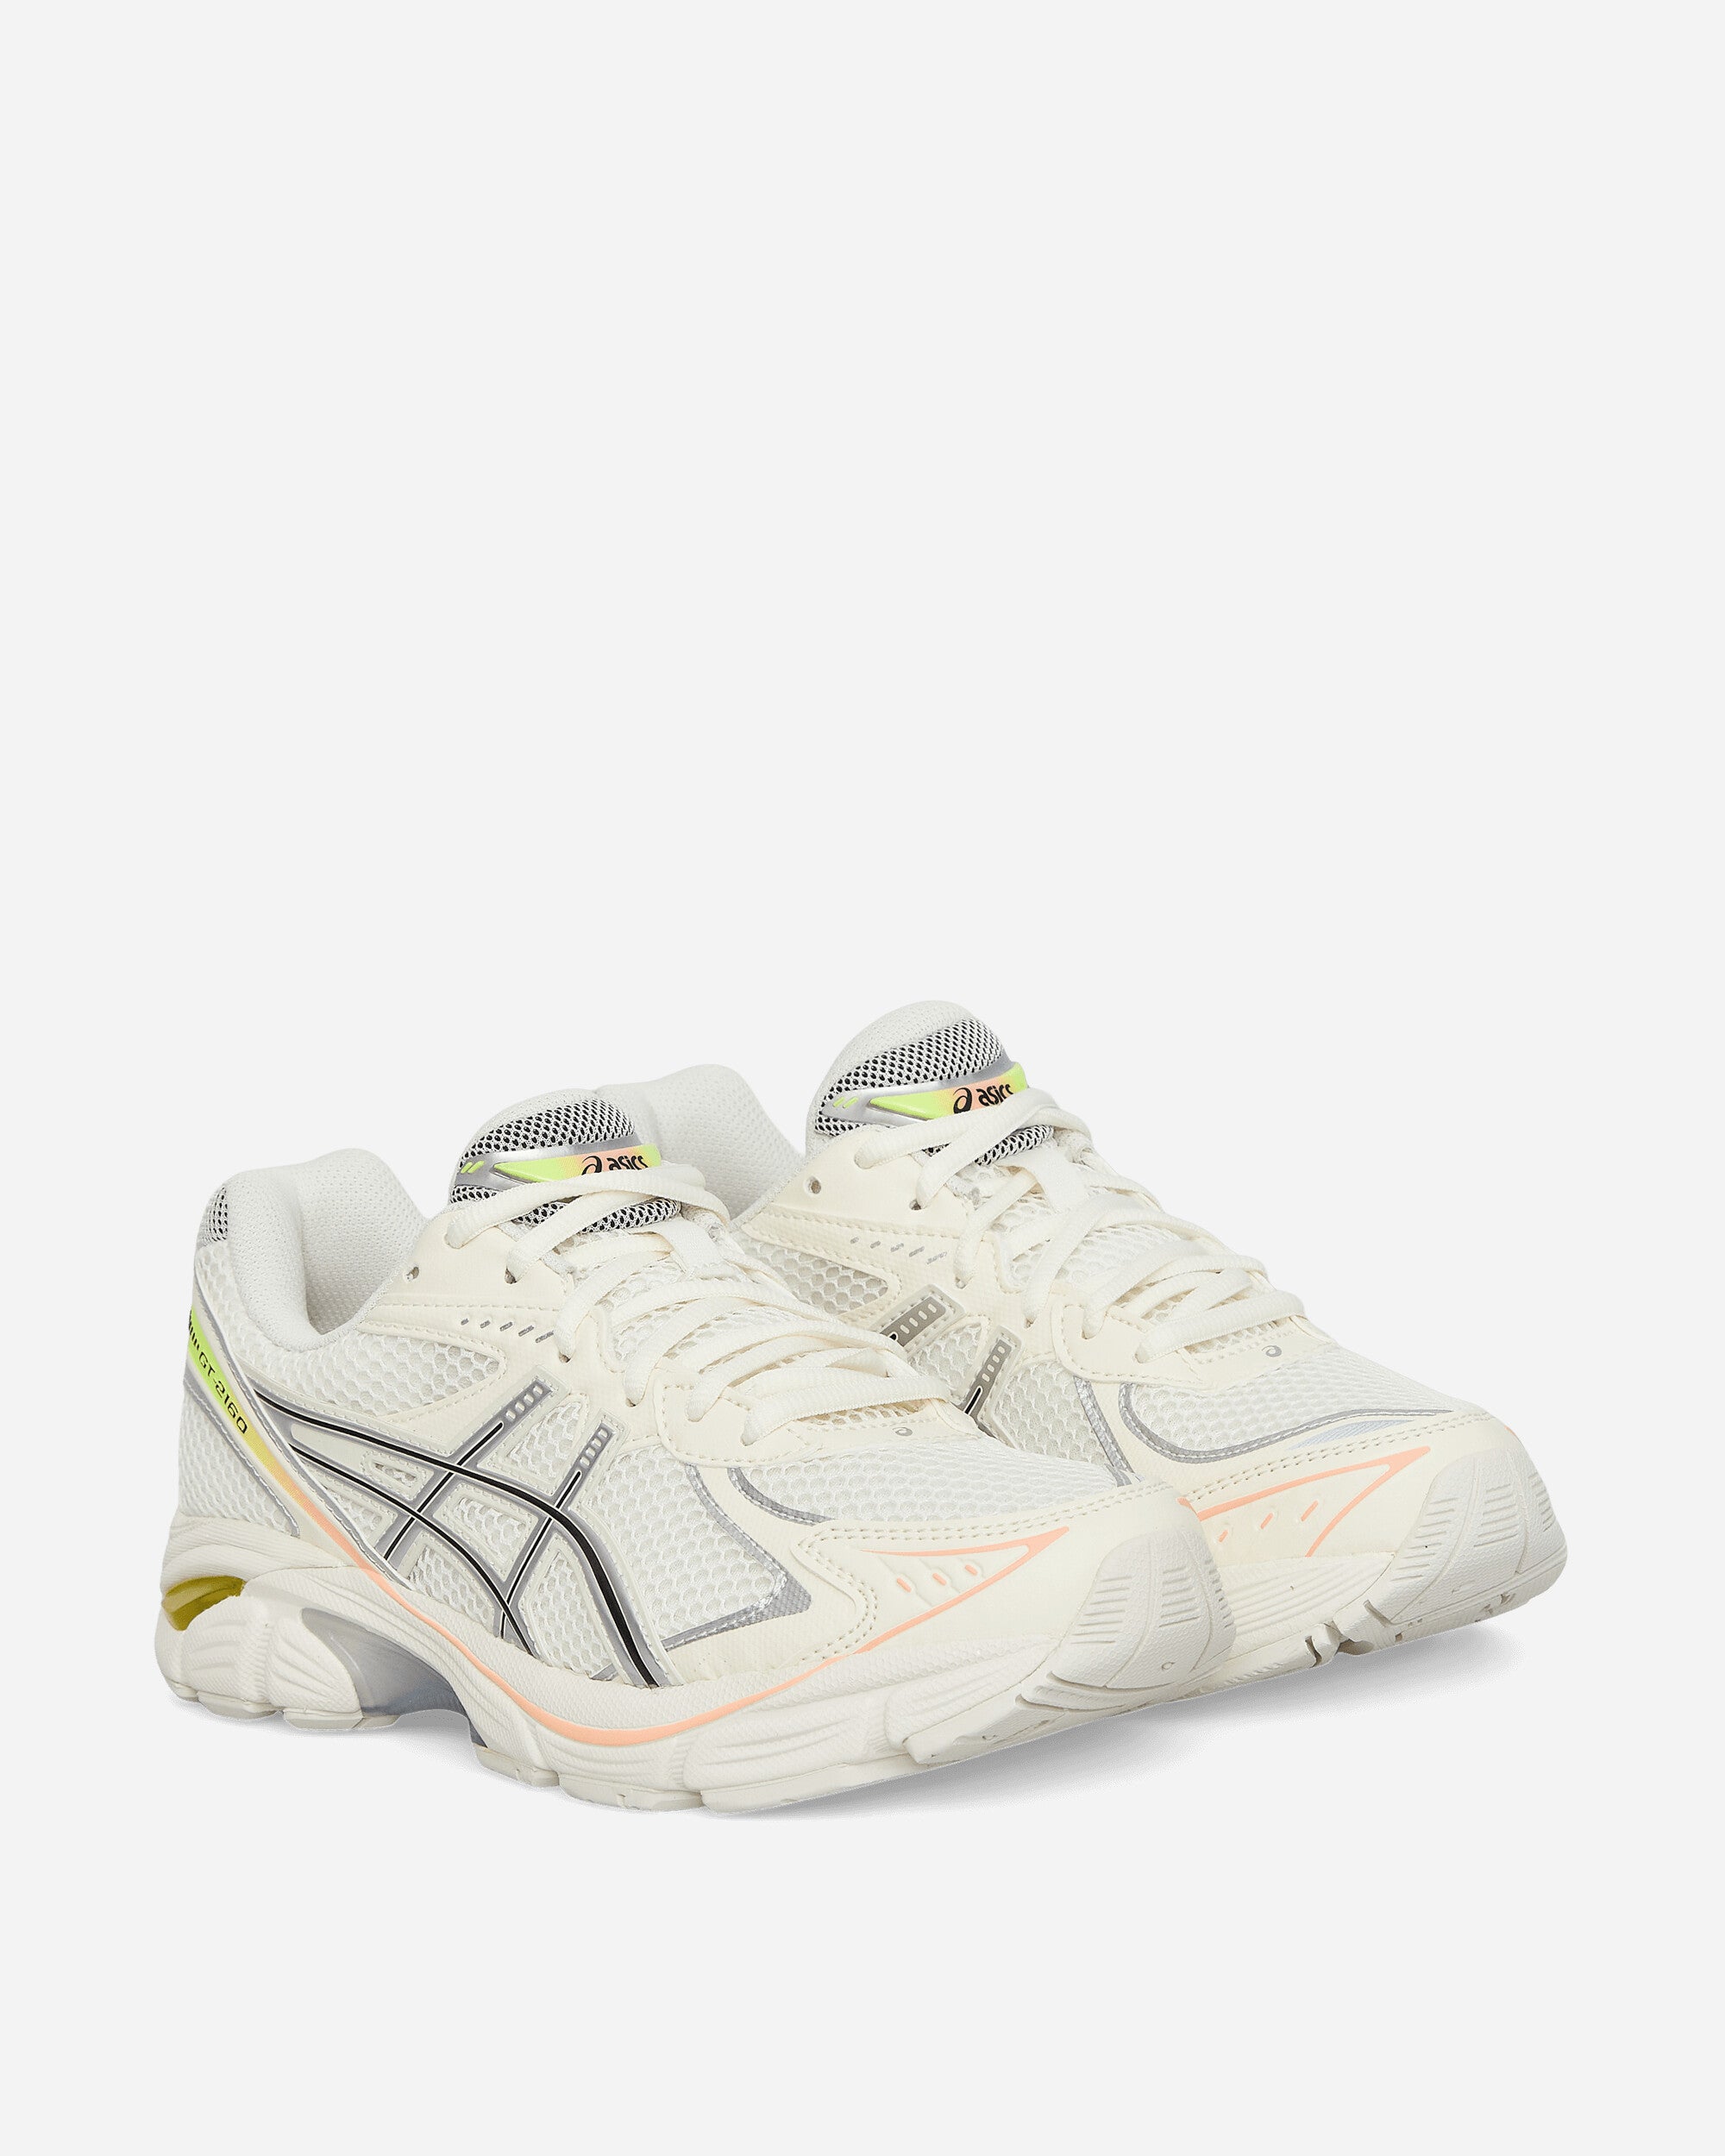 Asics Gt-2160 Paris Cream/Safety Yellow Sneakers Low 1203A570-750